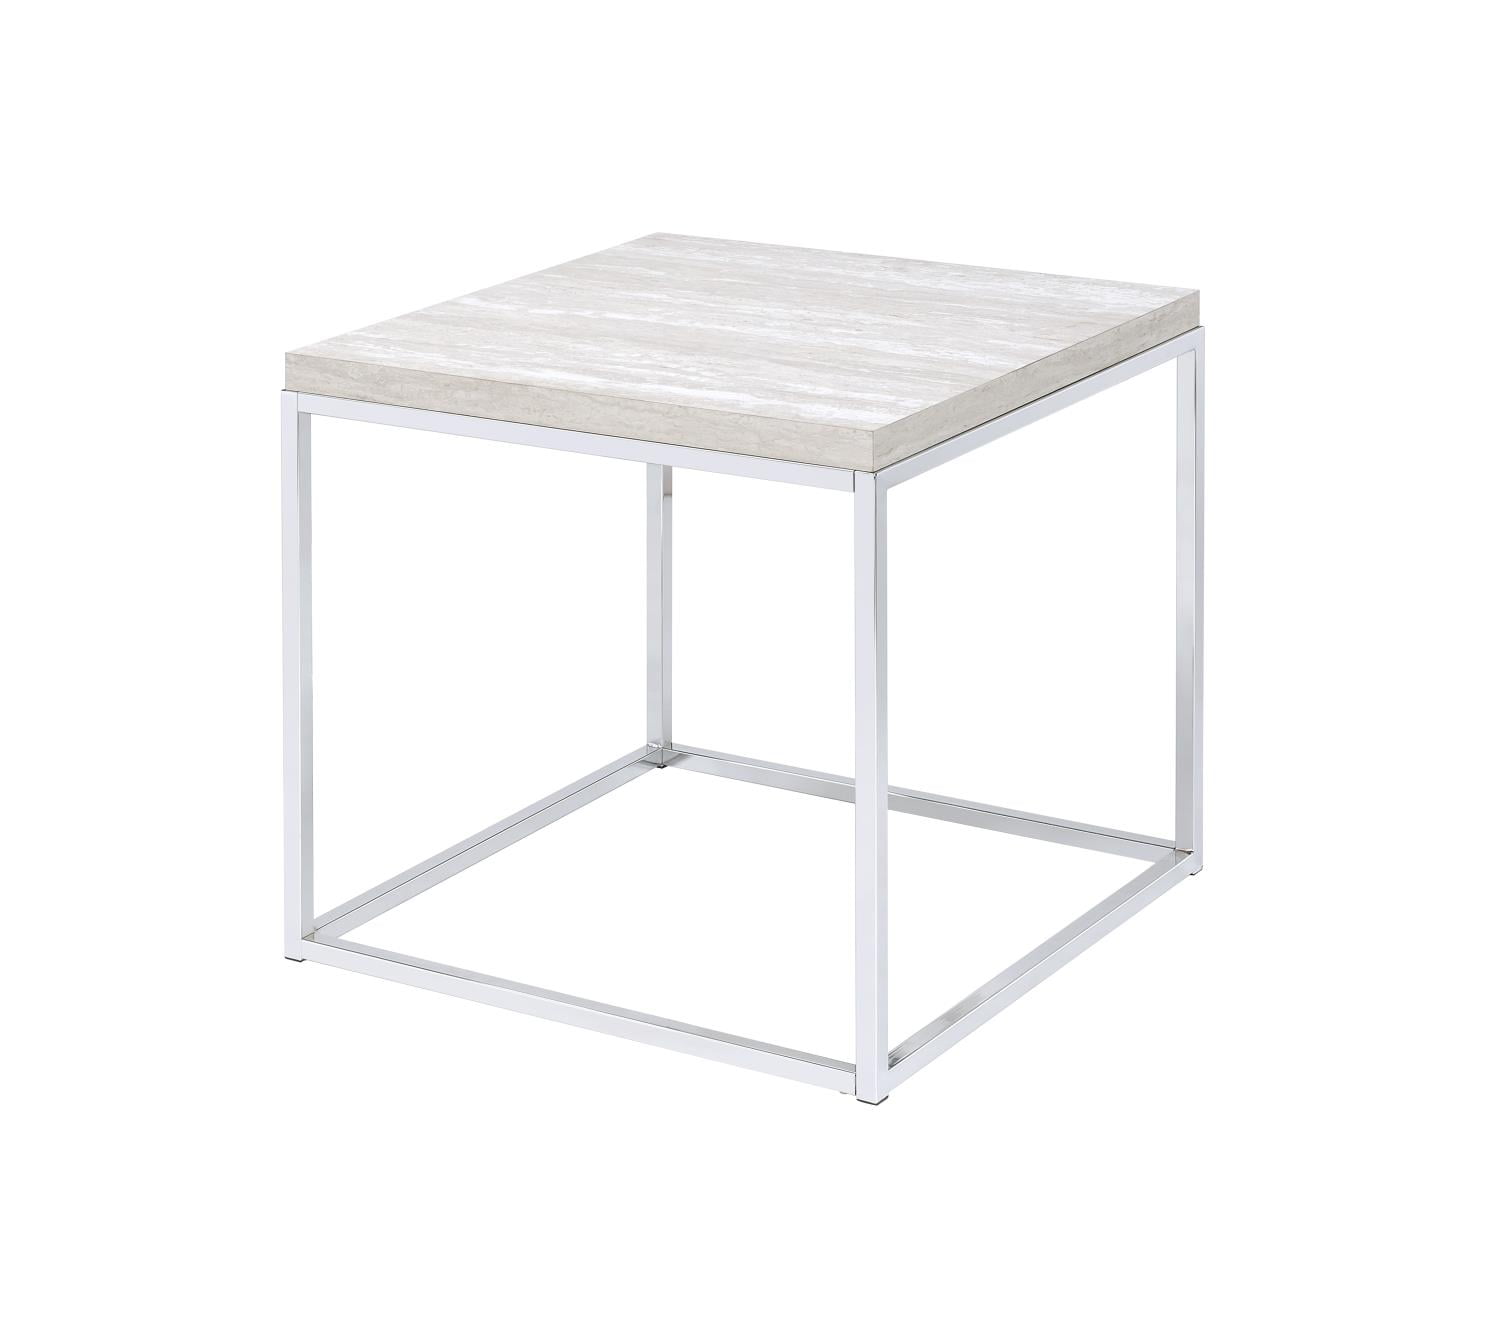 Picture of ACME 84627 Snyder End Table - Chrome - 24 x 24 x 24 in.